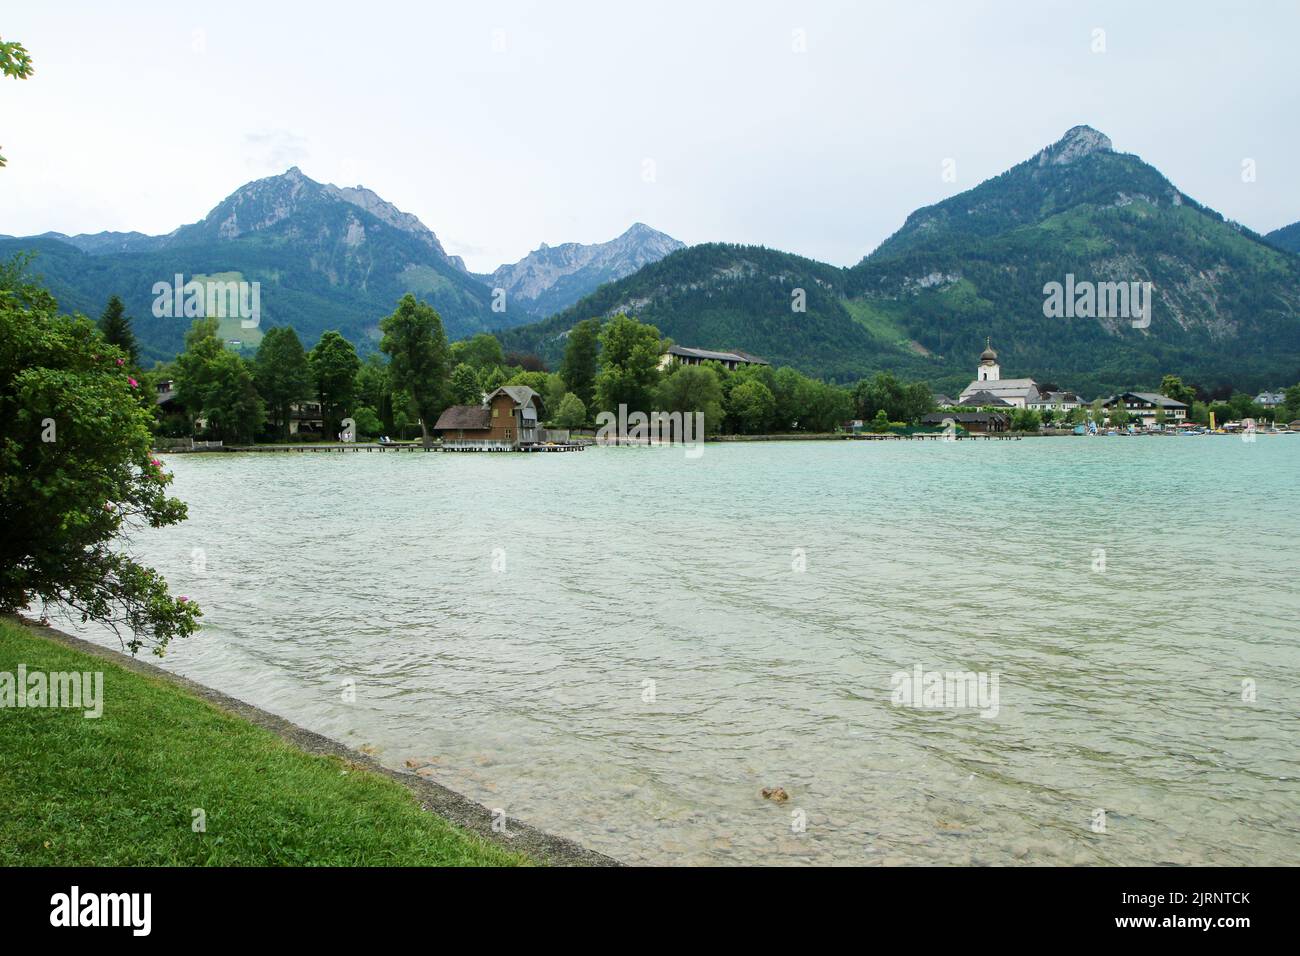 The glacier lake in Austria in the Alps during the rainy and cloudy day. Travel destination for the tourists. Stock Photo